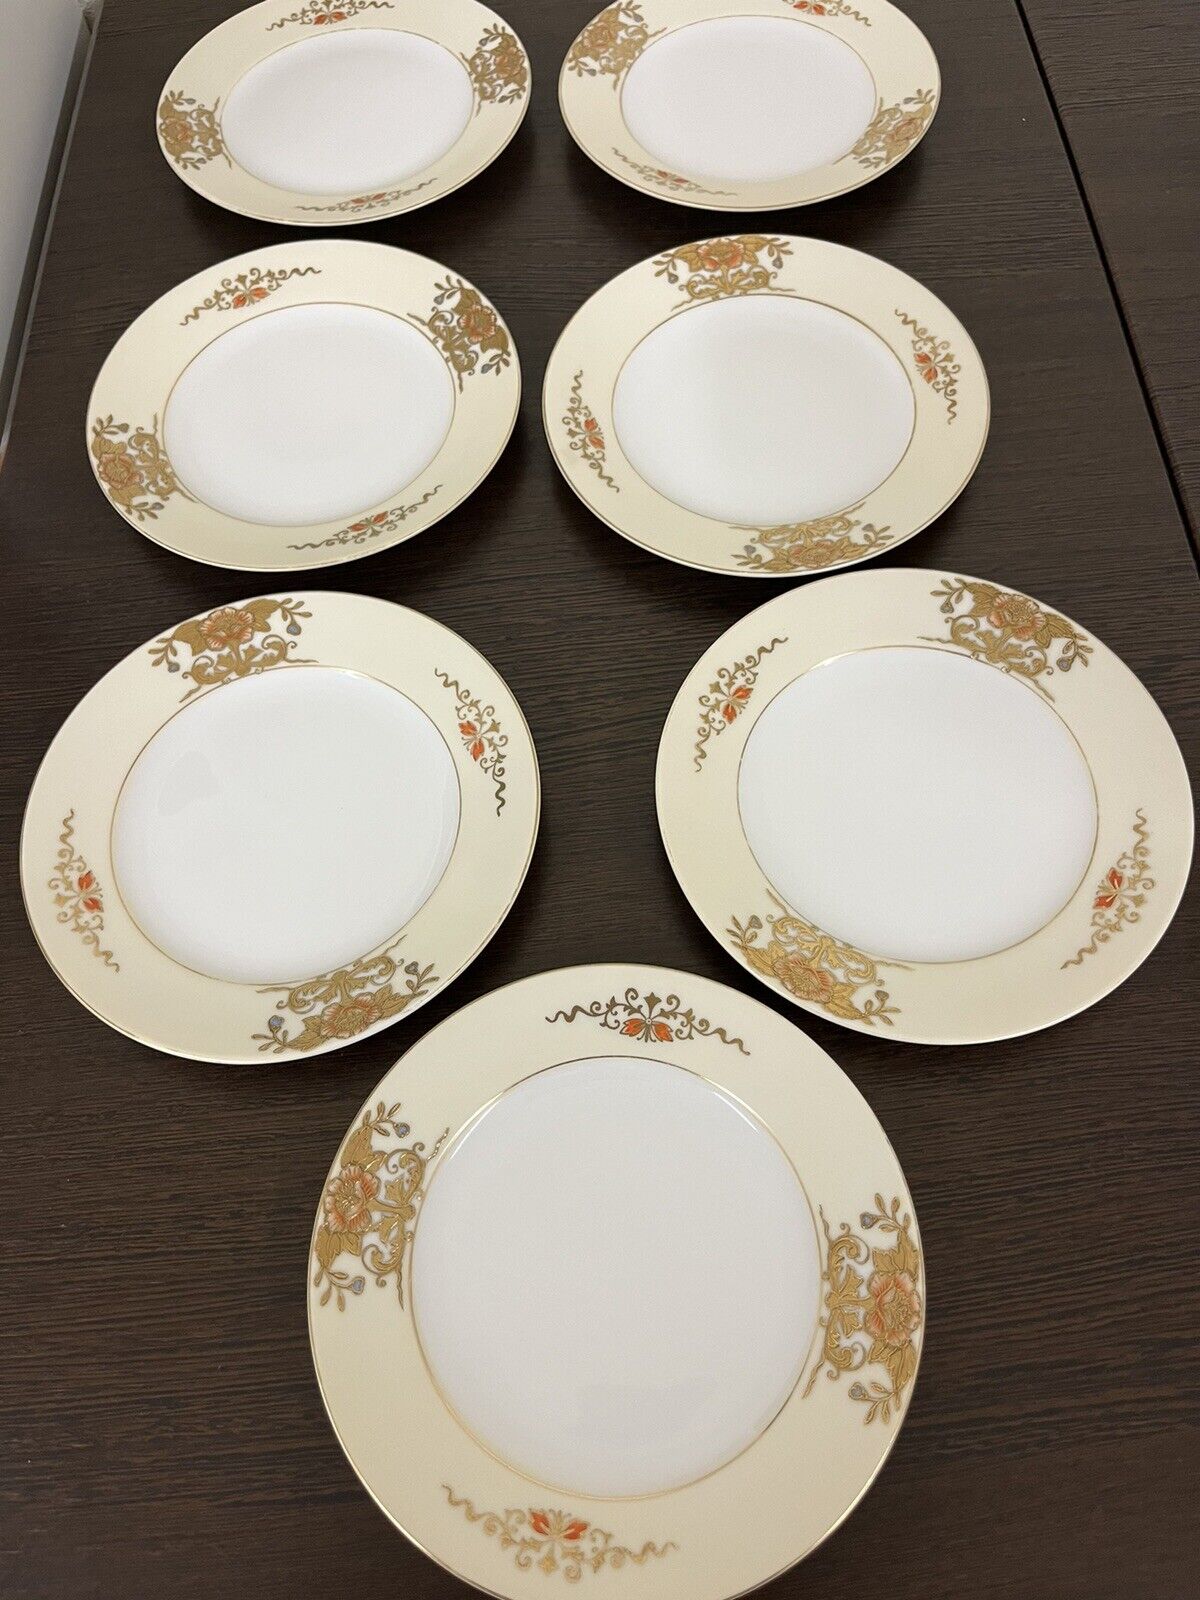 7 PIECES OF NORITAKE RED \